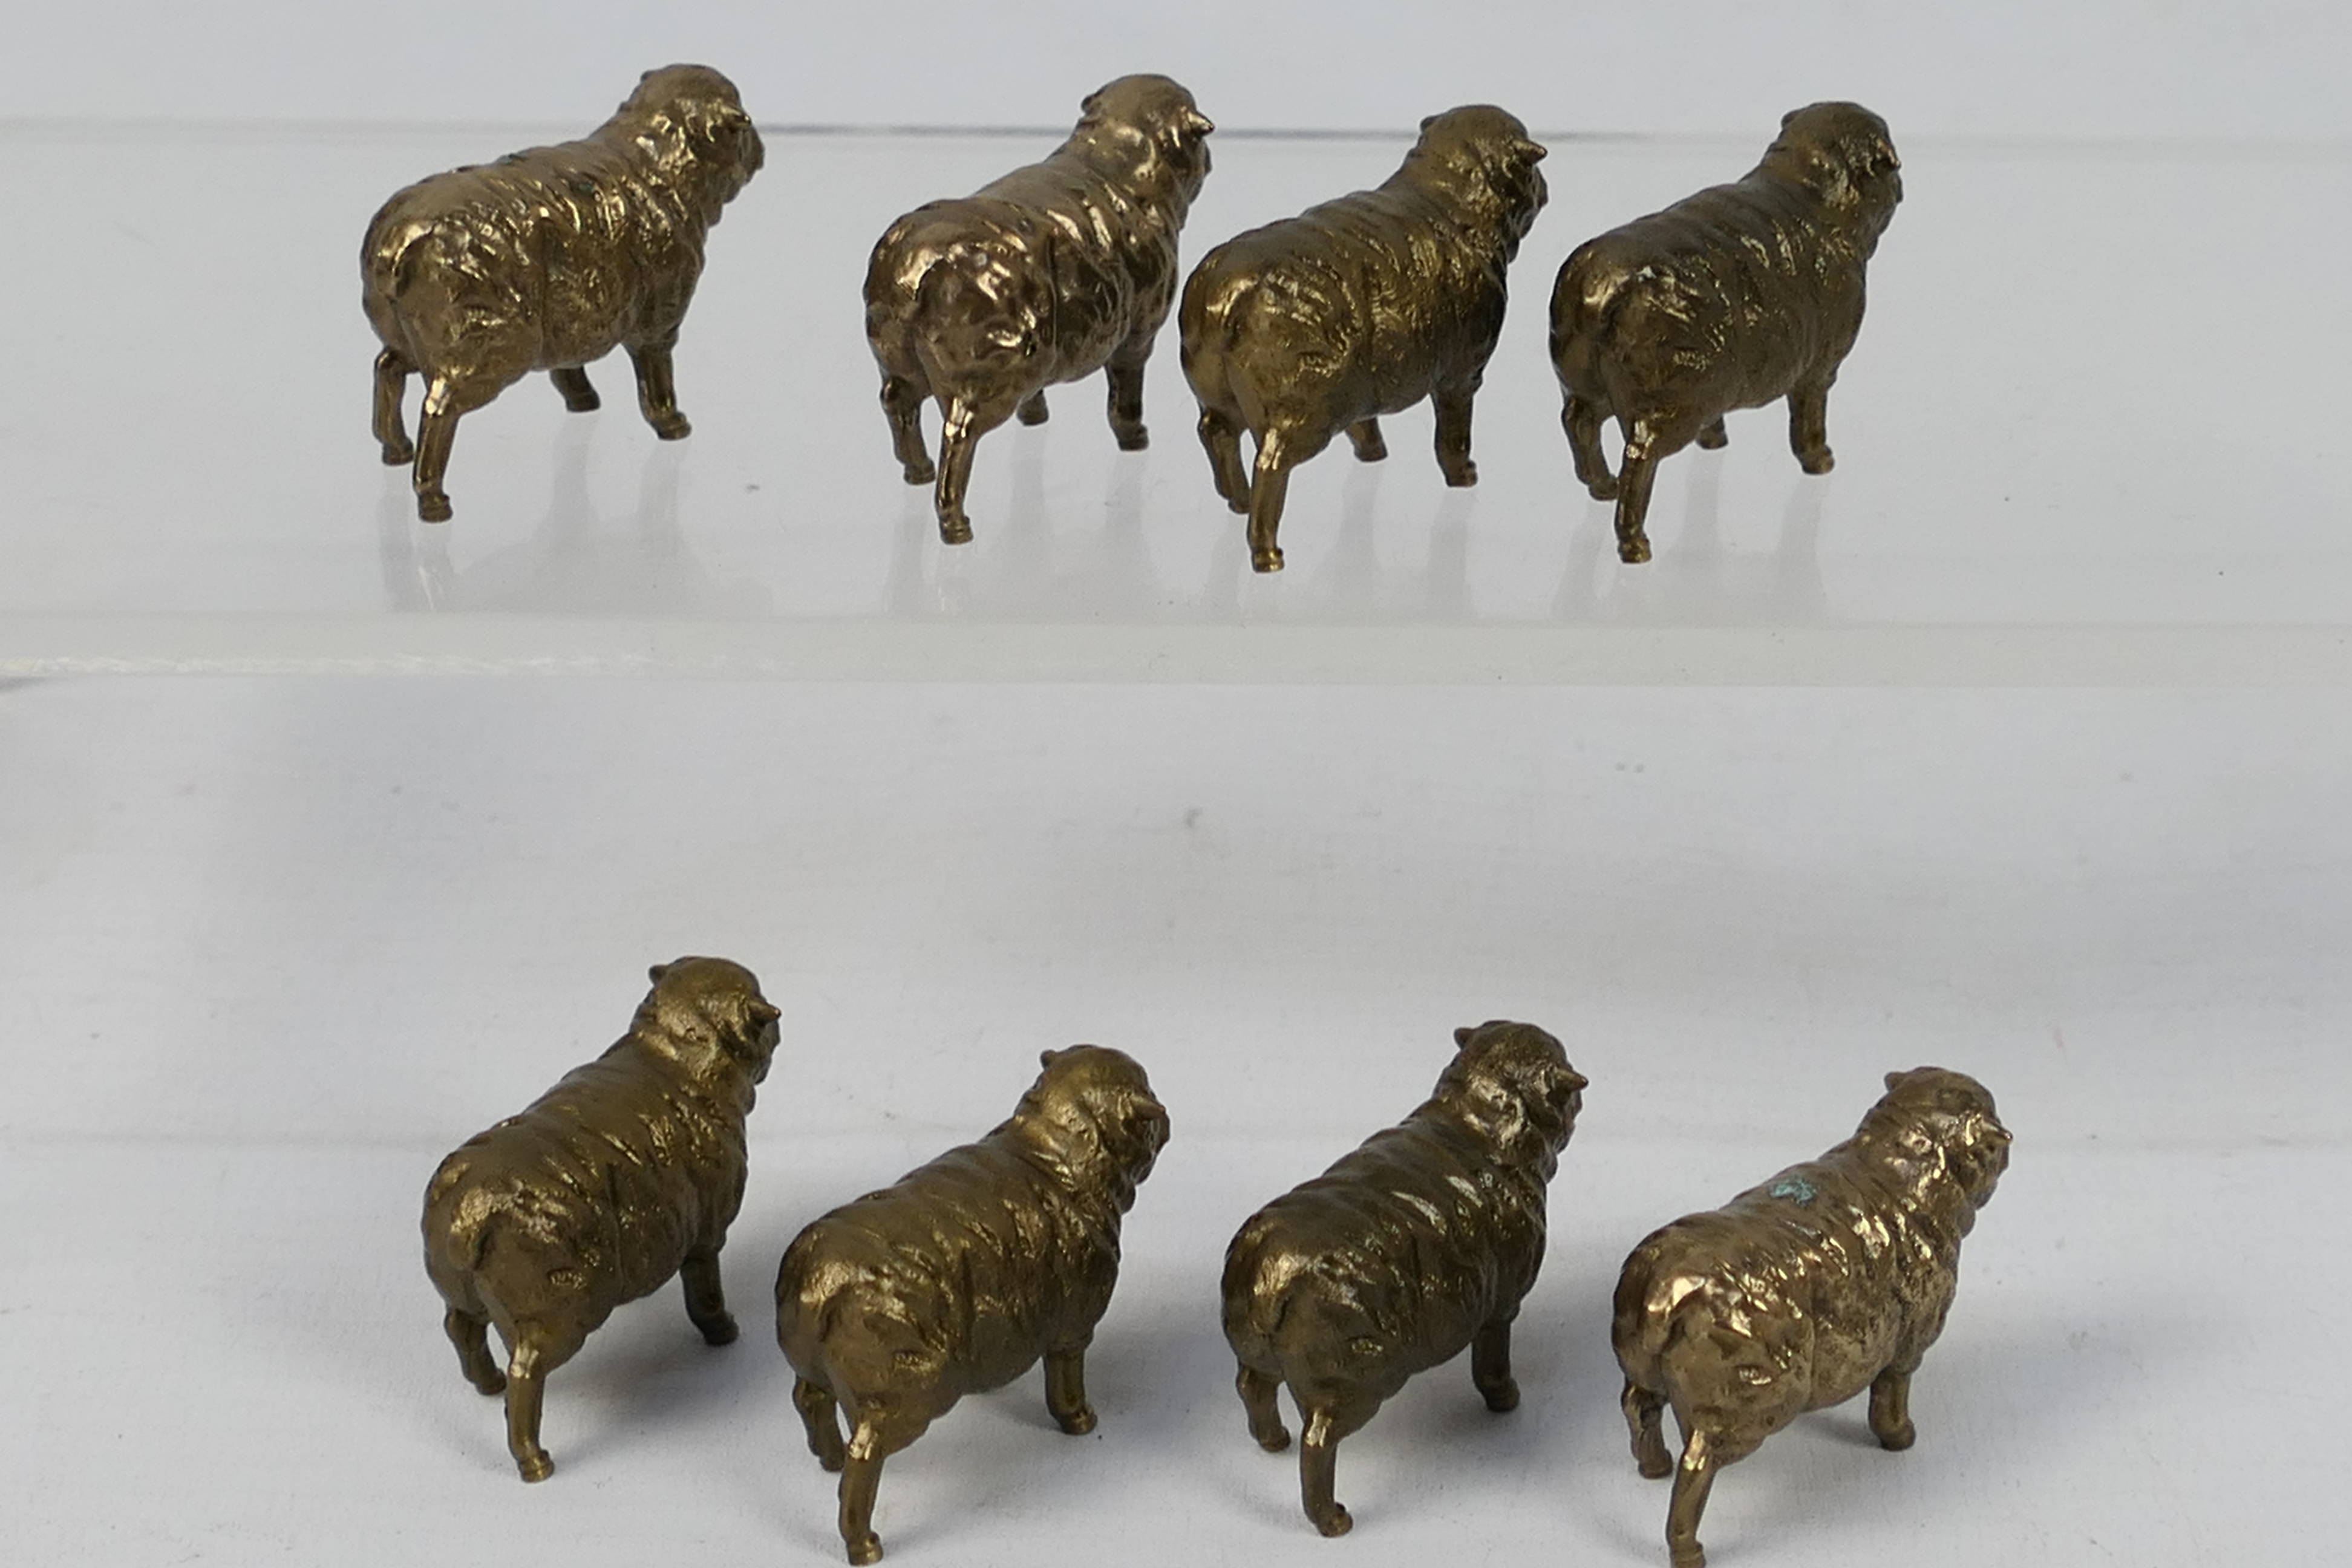 8 x bronze sheep figures. All in same si - Image 6 of 6